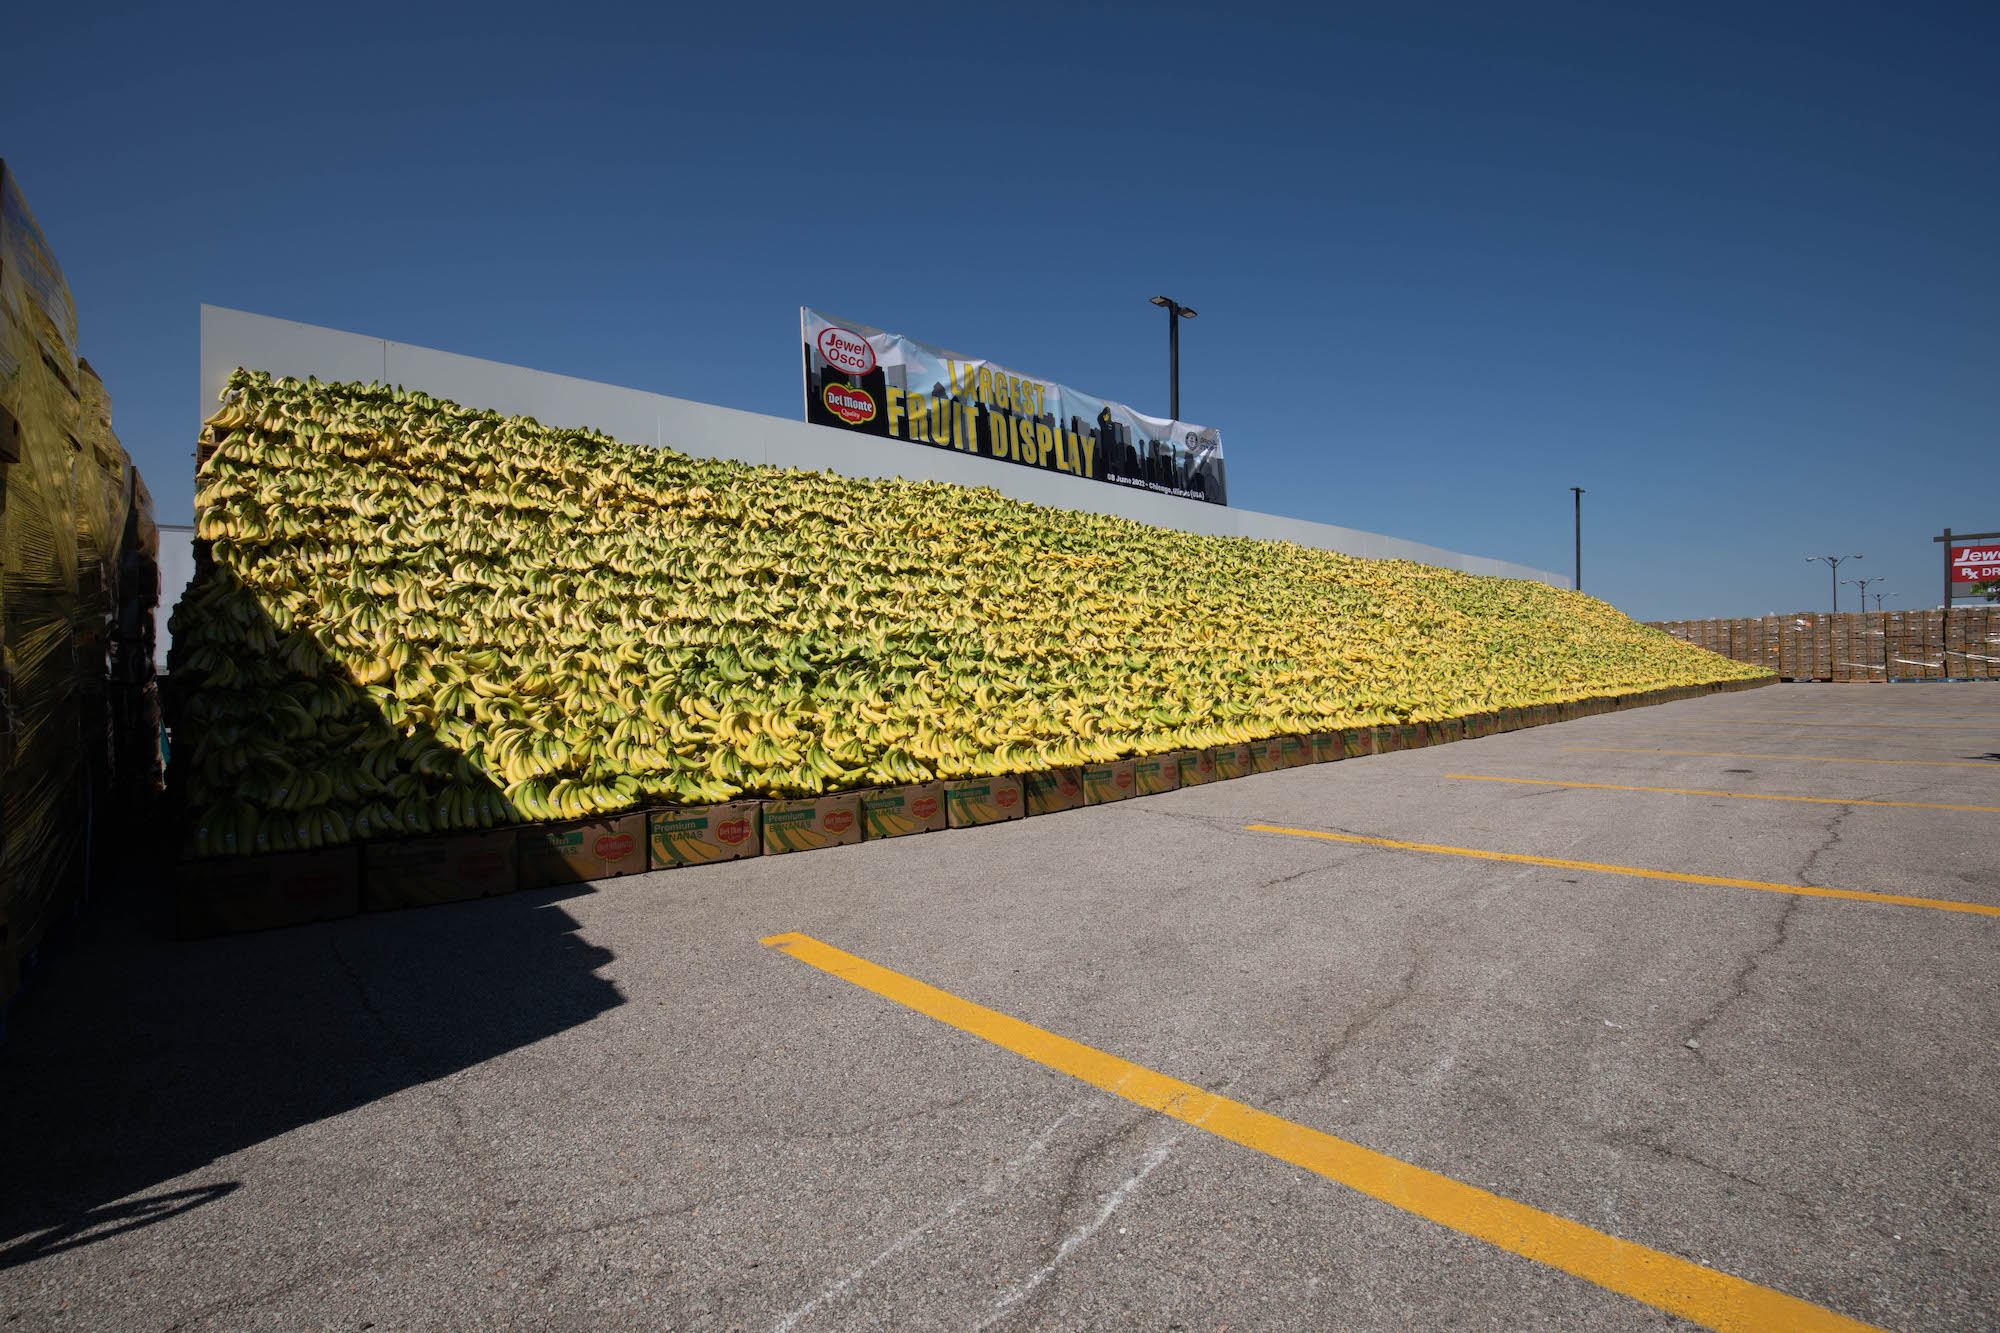    Together, a fresh produce supplier and retailer broke a world record: World’s Largest Fruit Display.